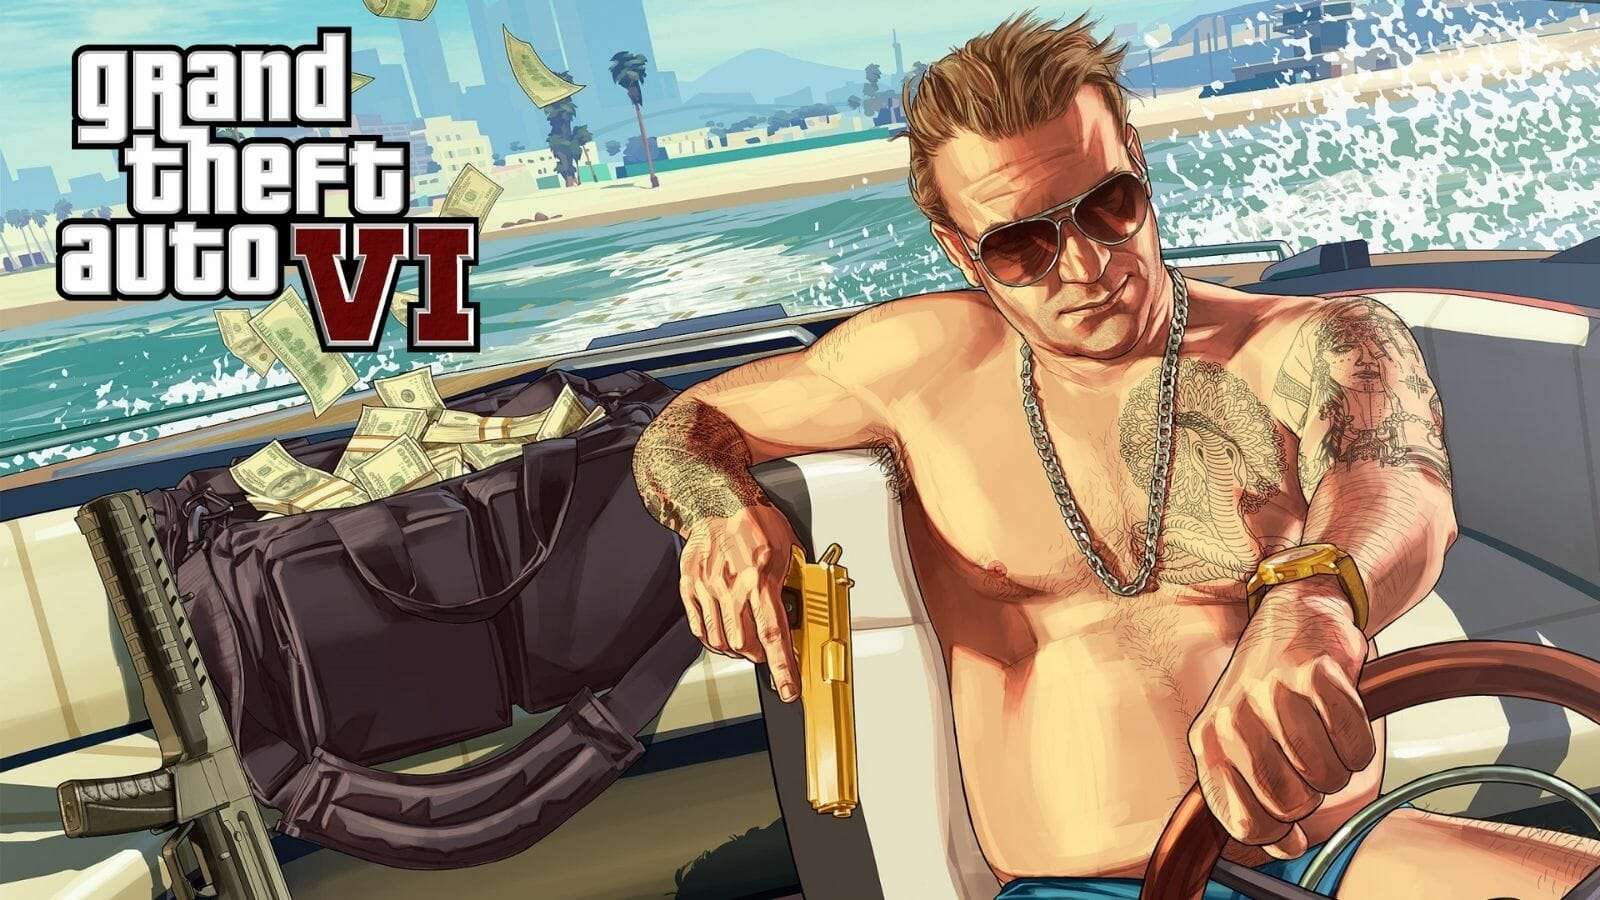 GTA character in boat with GTA 6 logo